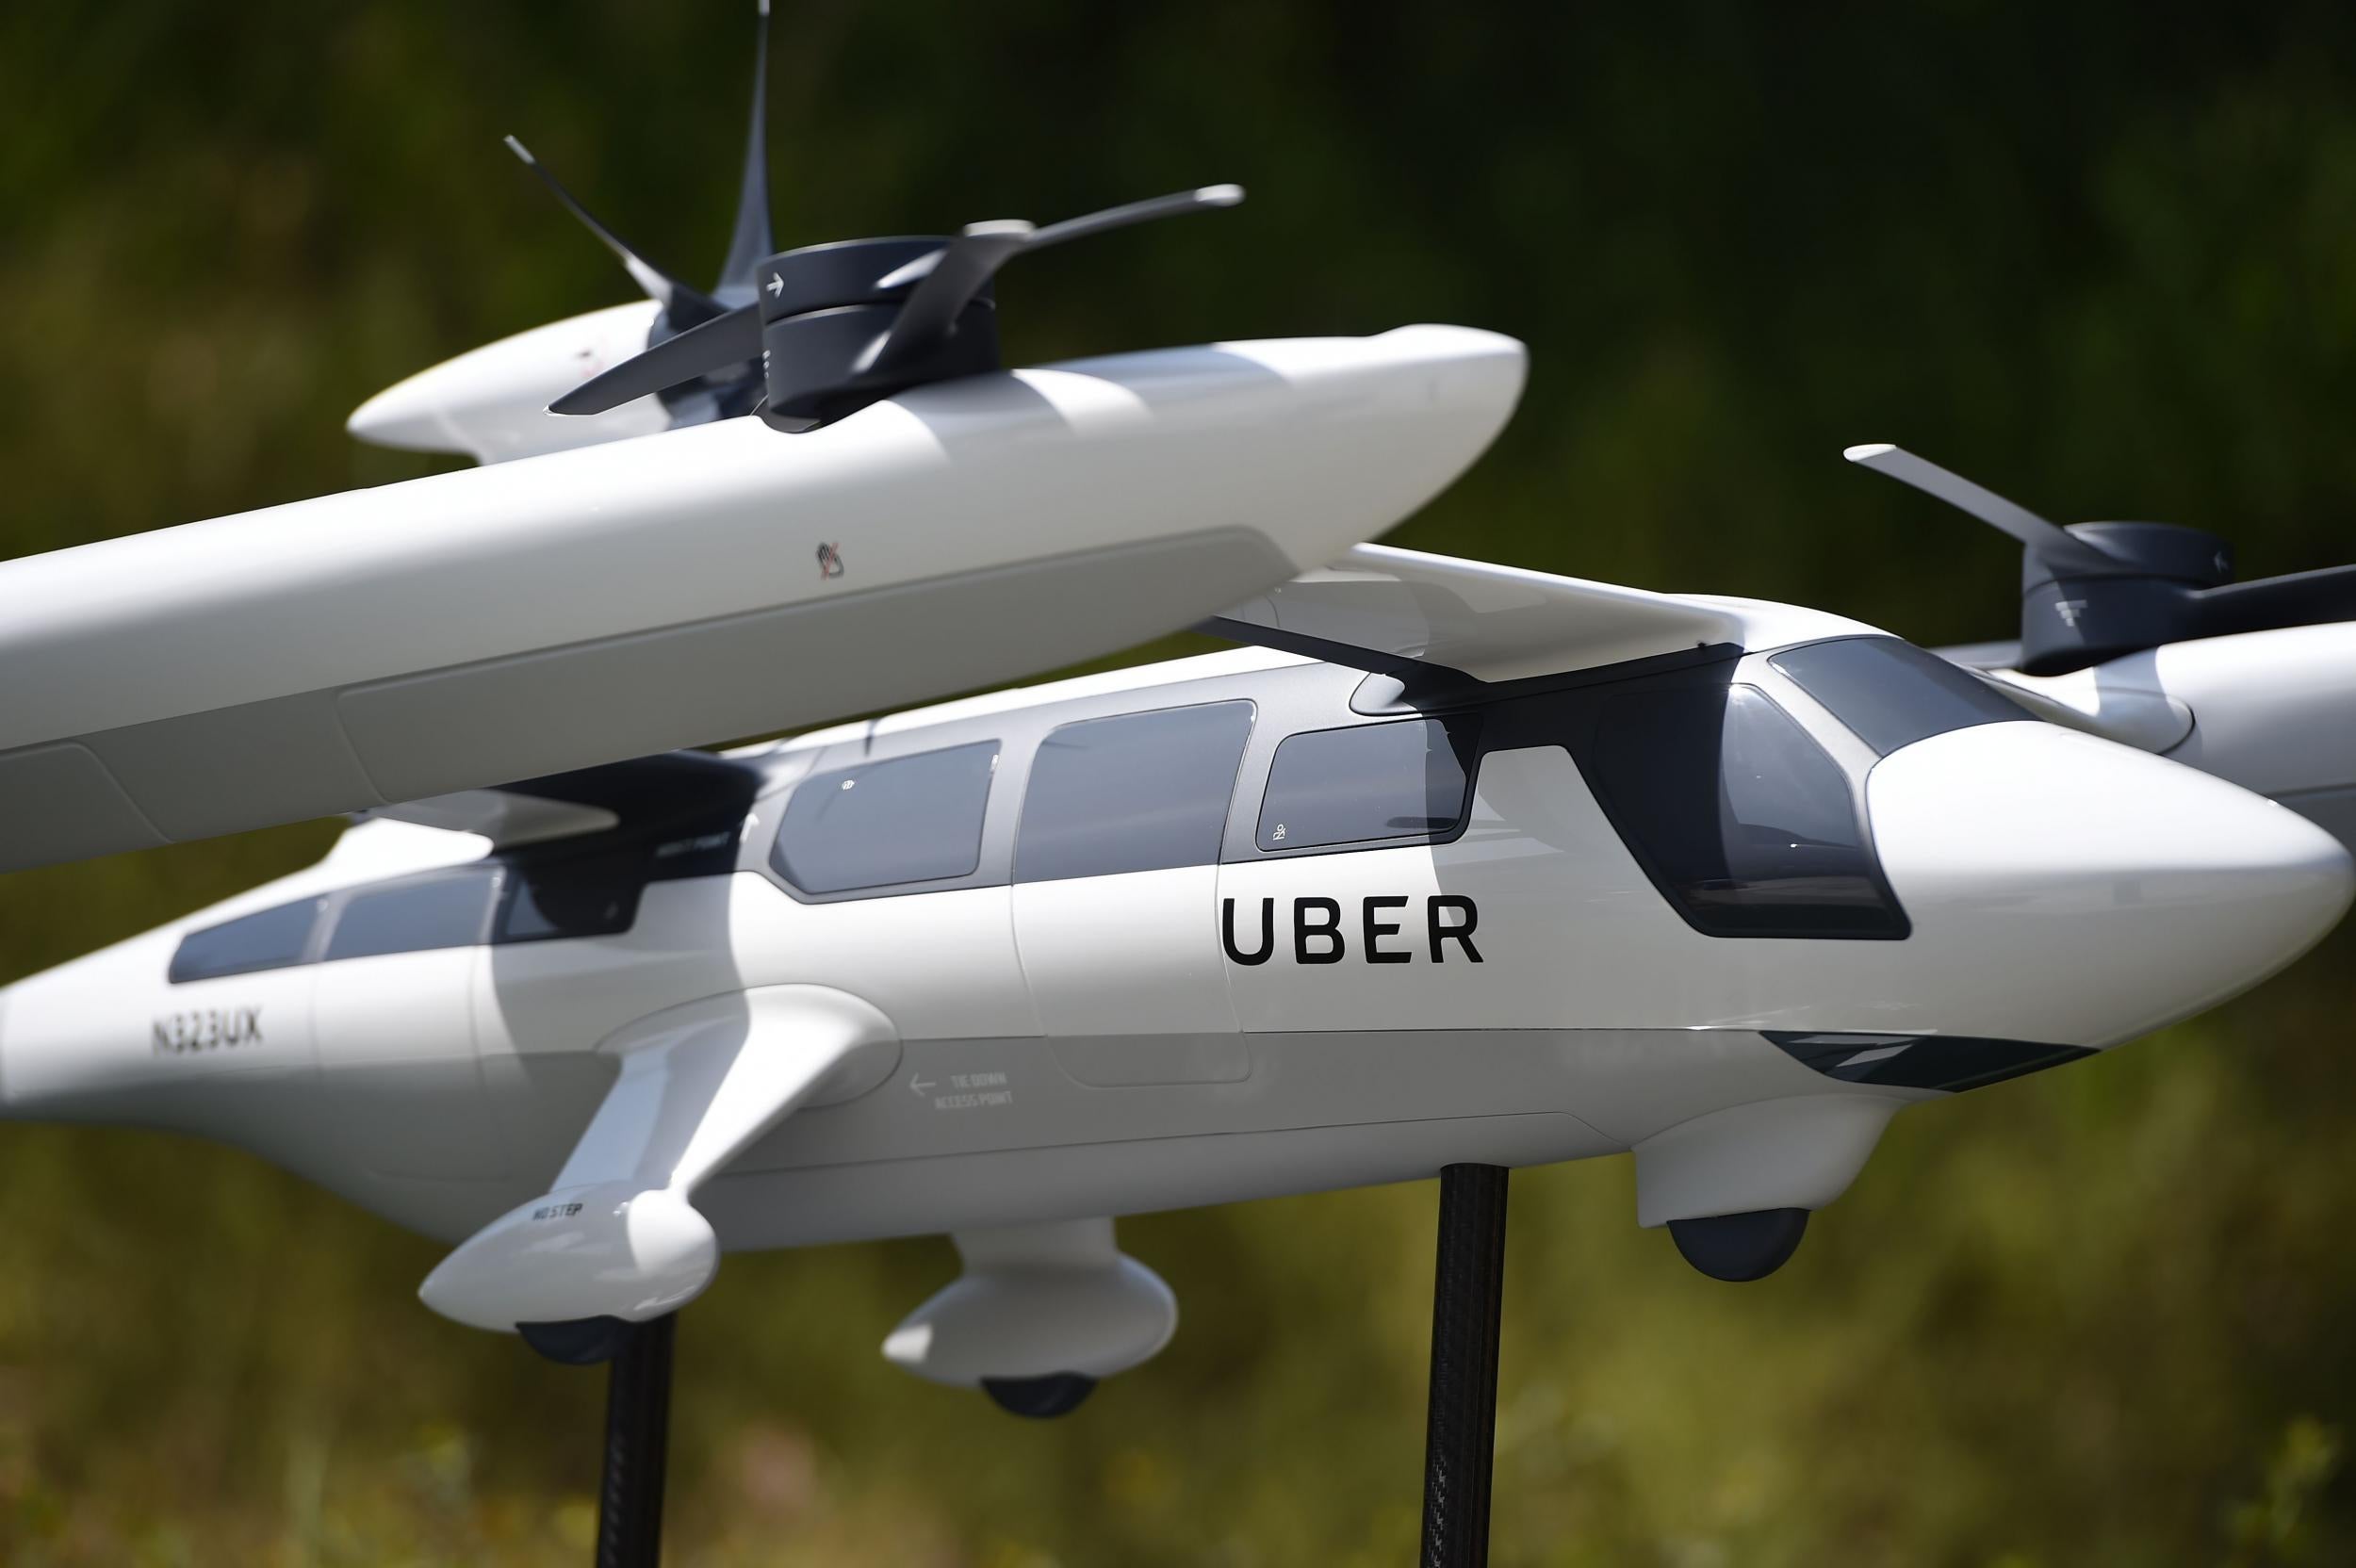 A model of Uber's electric vertical take-off and landing vehicle concept (eVTOL) flying taxi is displayed at the second annual Uber Elevate Summit, on May 8, 2018 at the Skirball Center in Los Angeles, California. Uber introduced it's electric powered 'flying taxi' vertical take-off and landing concept aircraft at the event, which showcases prototypes for UberAir's fleet of airborne taxis.